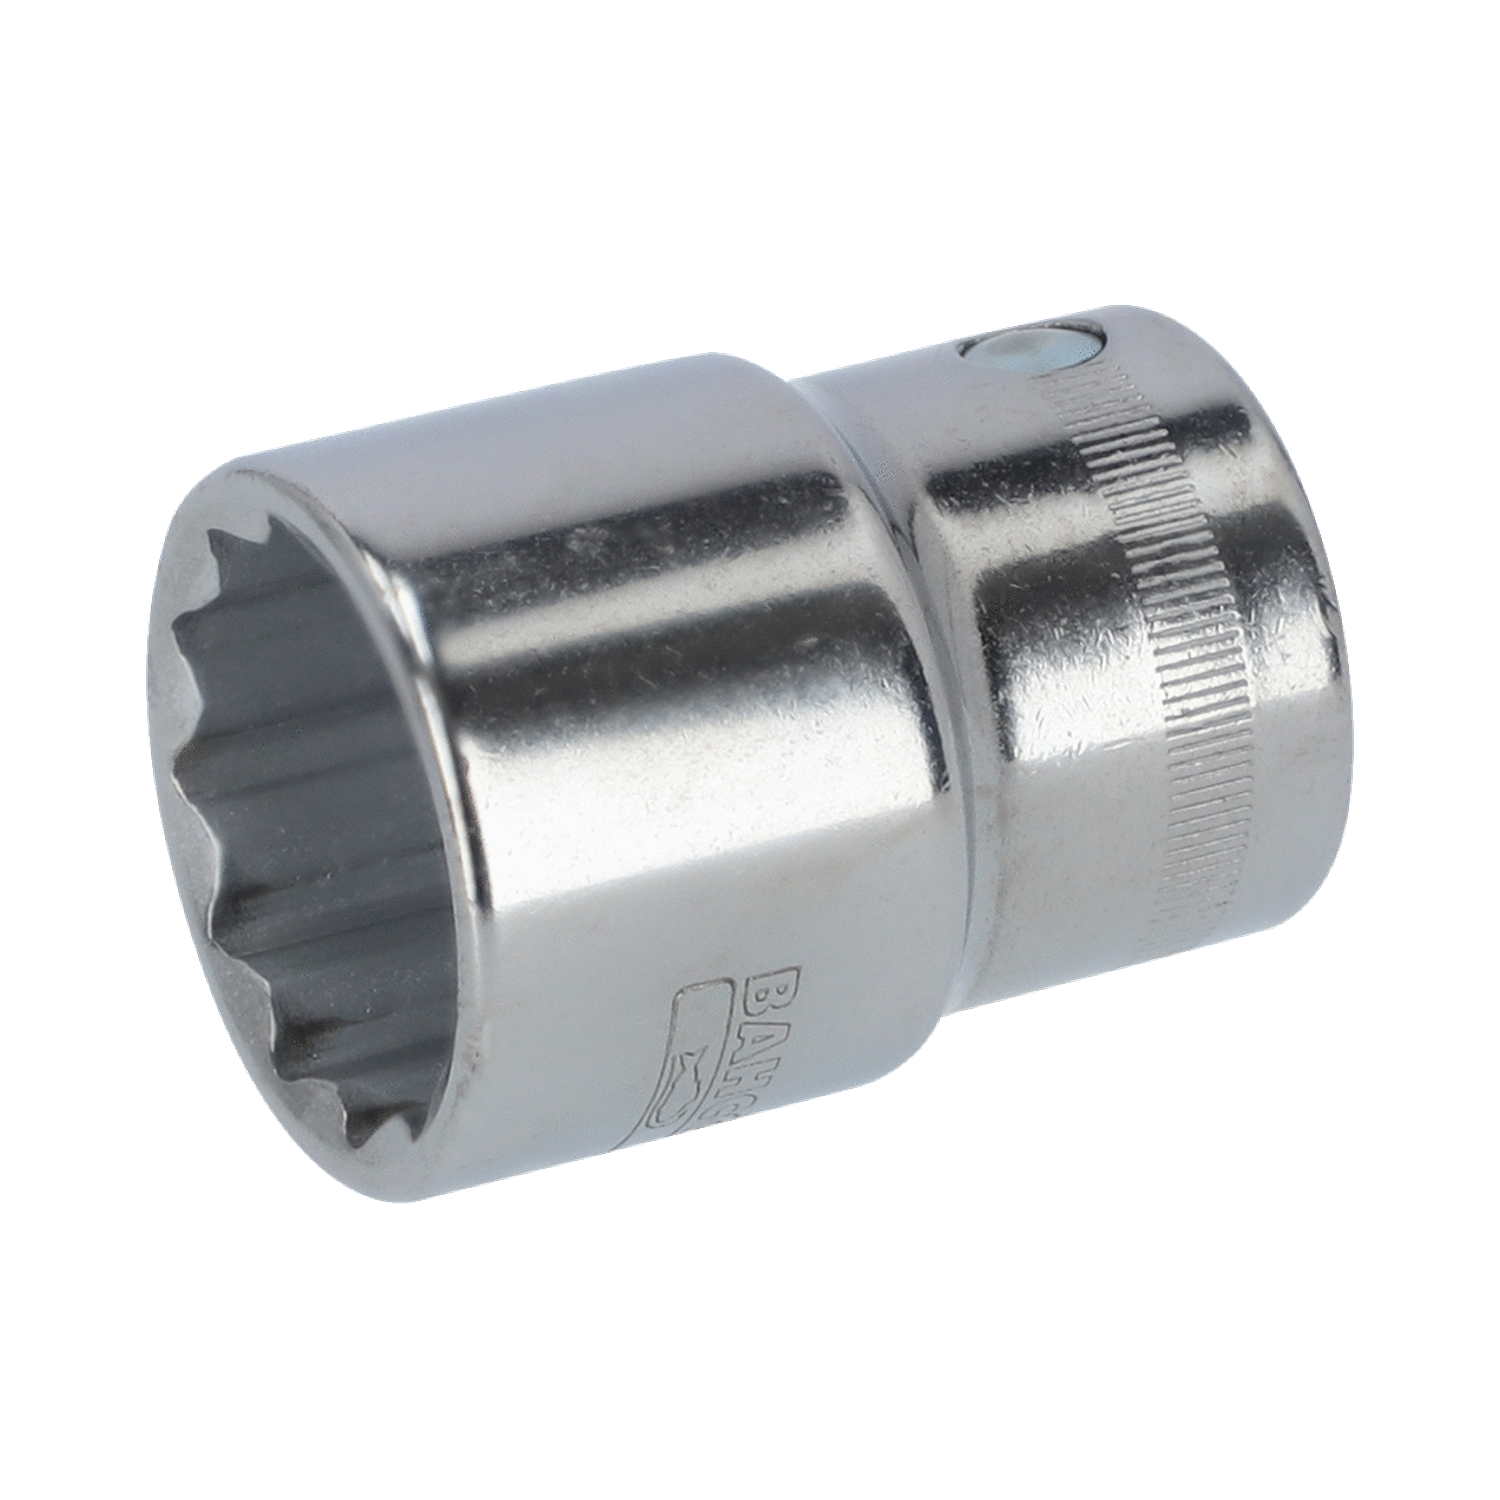 BAHCO 8900DZ 3/4" Square Screwdriver Socket with Imperial - Premium Screwdriver Socket from BAHCO - Shop now at Yew Aik.